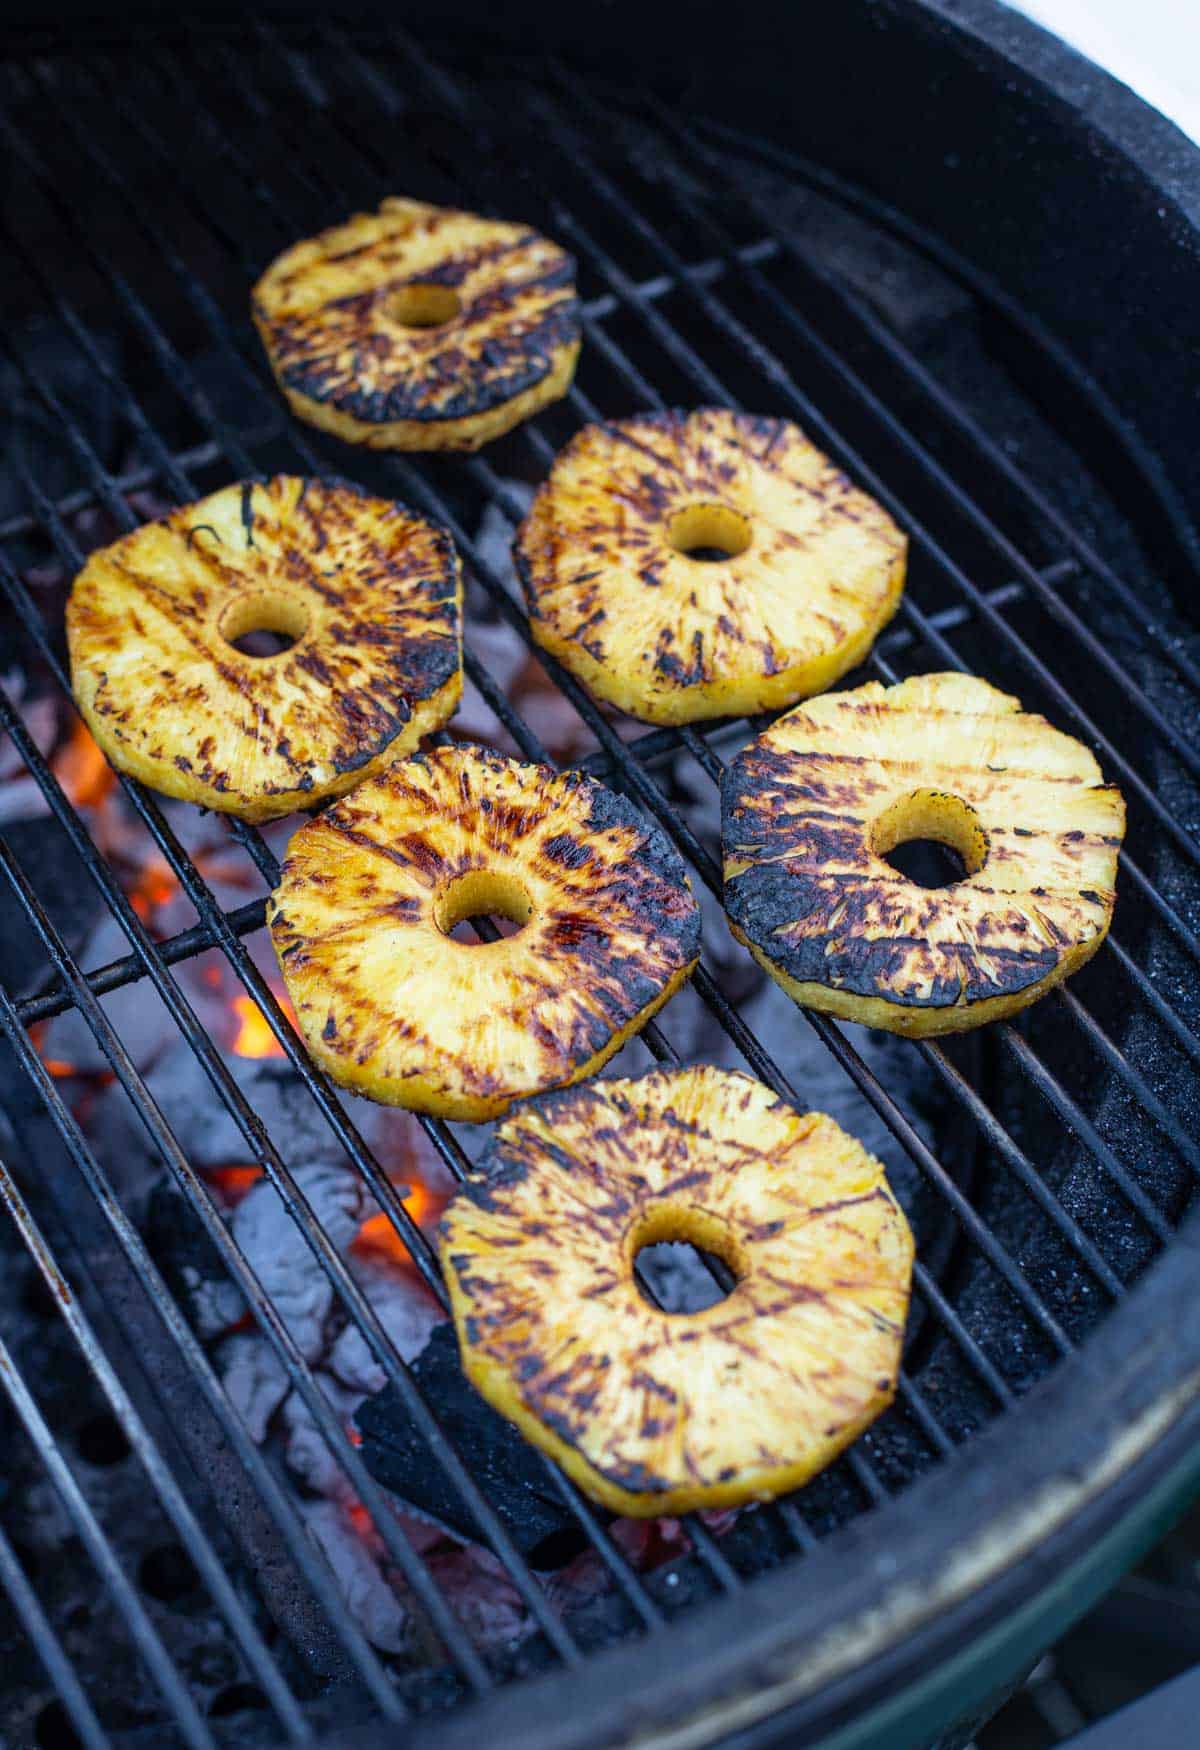 Grilled Pineapple slices over direct heat on the grill.